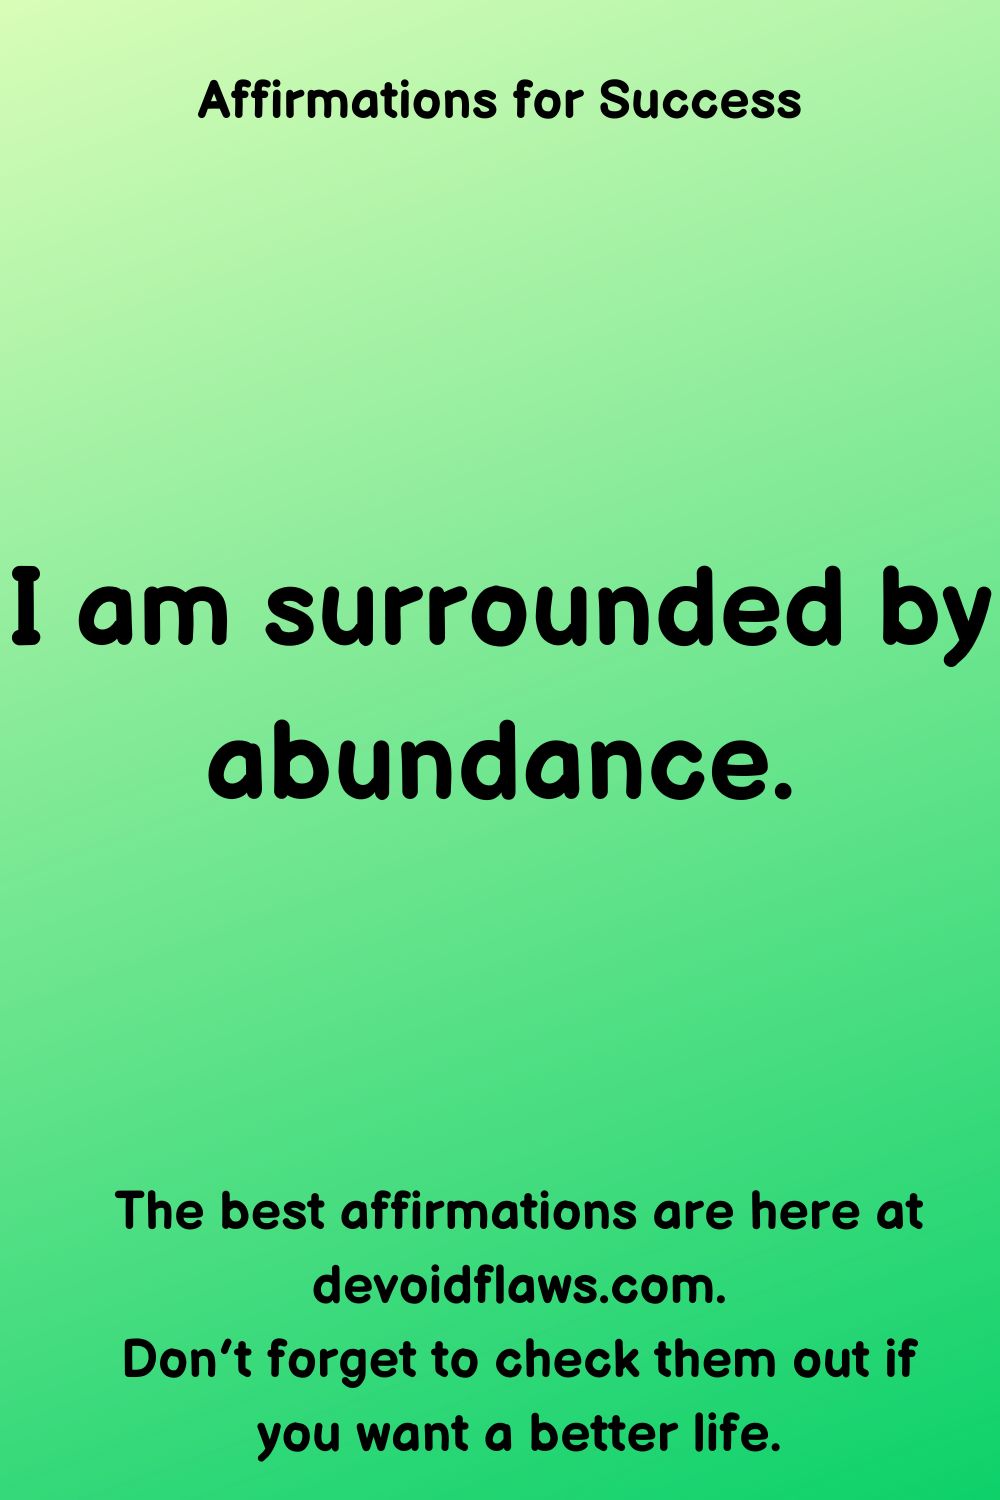 100 Self-Affirmations to Achieve Success in Life